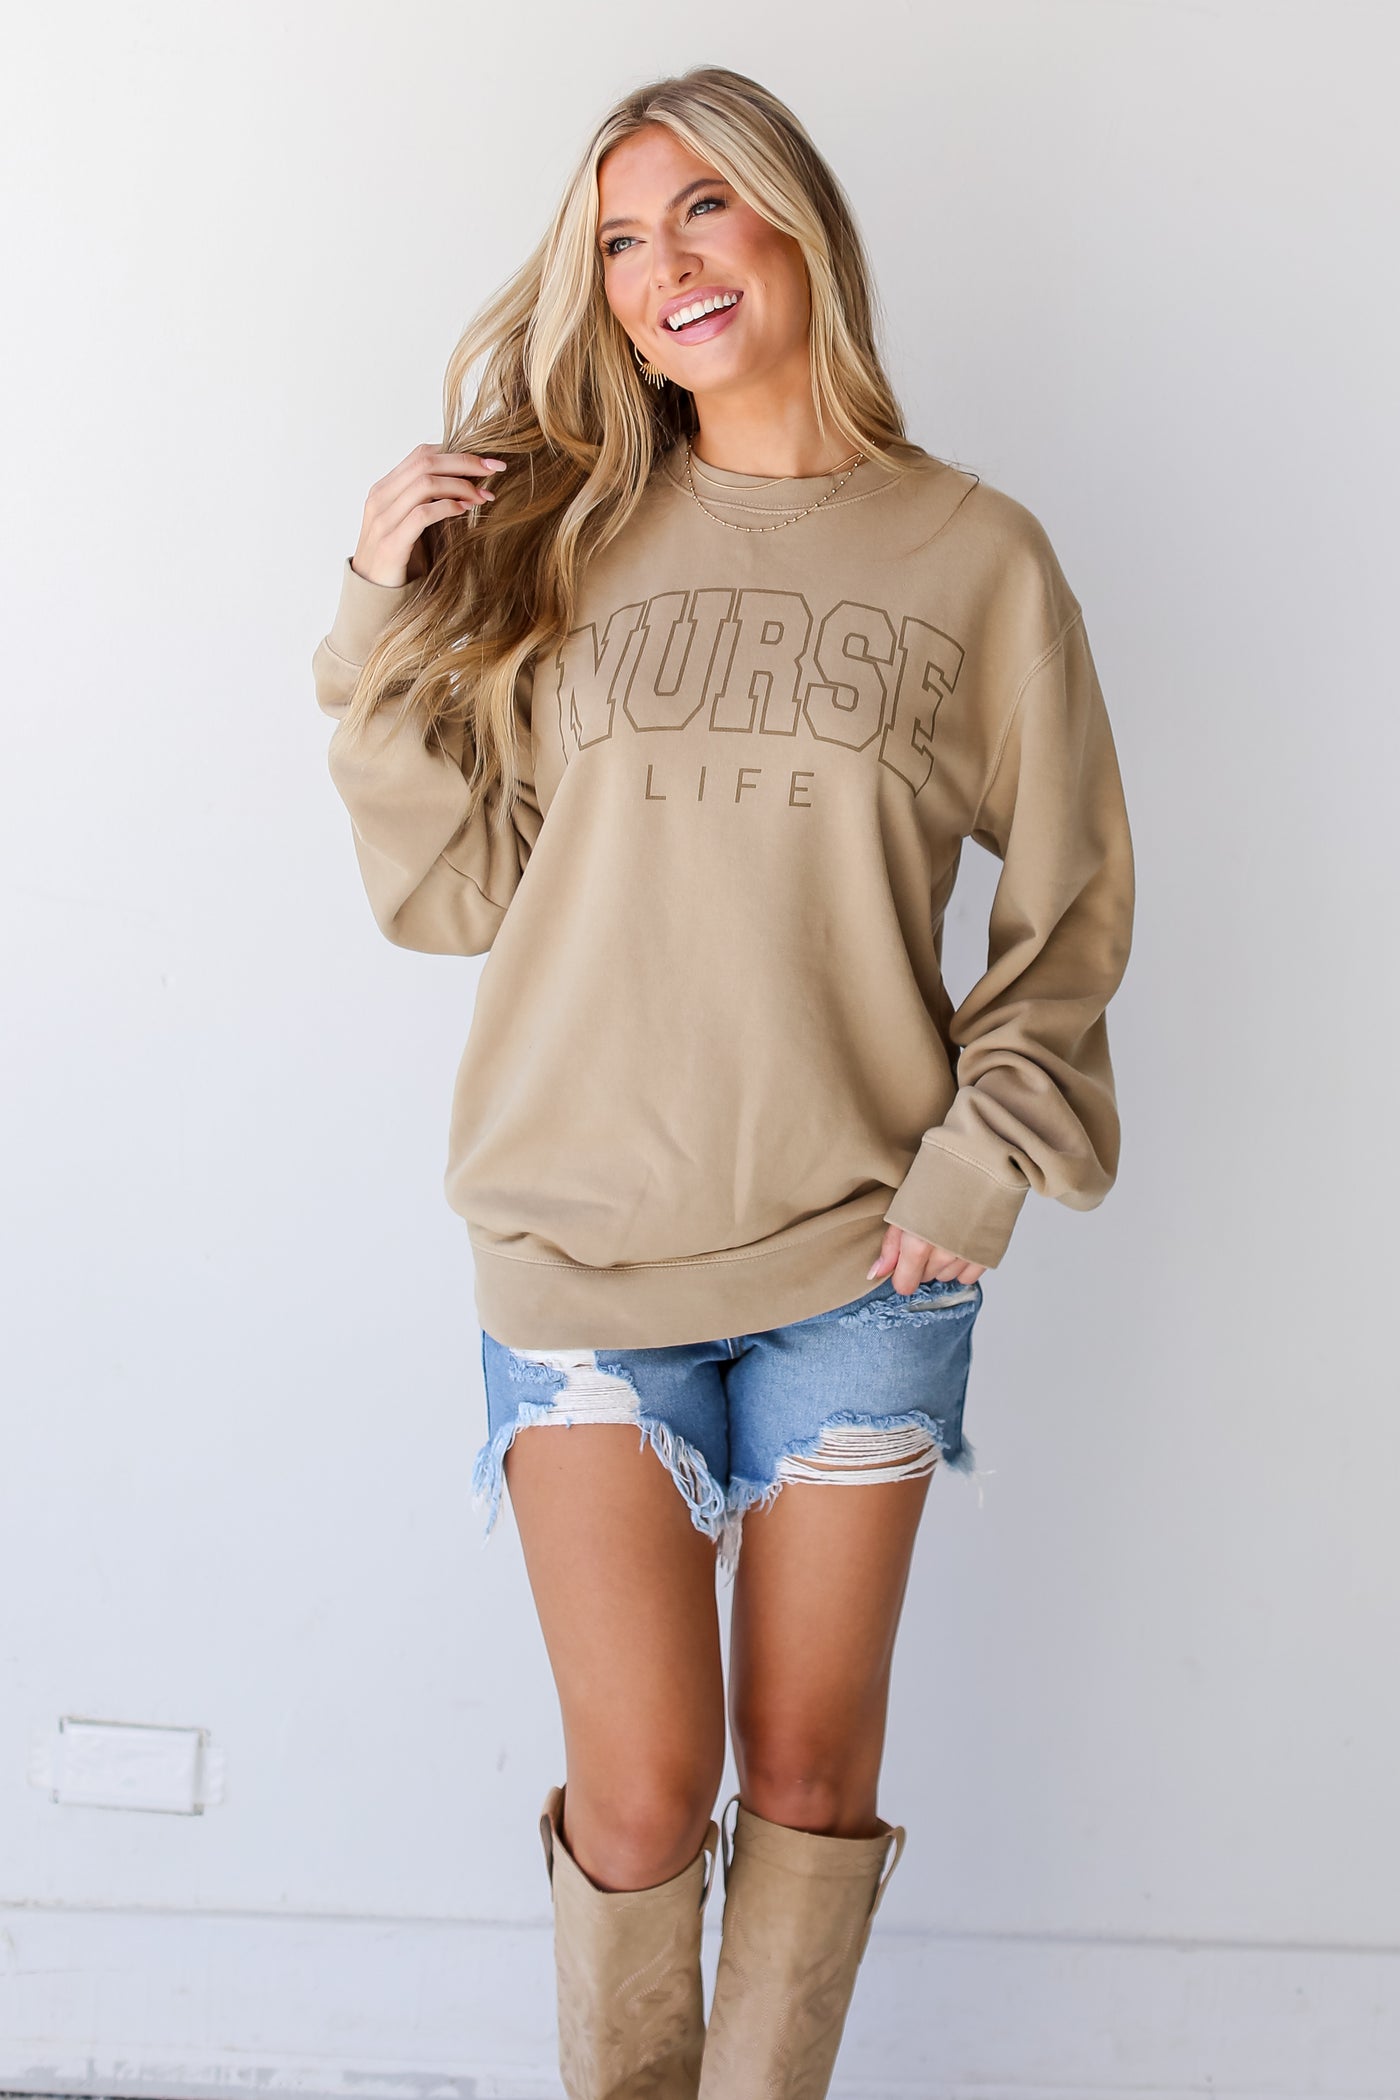 Tan Nurse Life Pullover front view